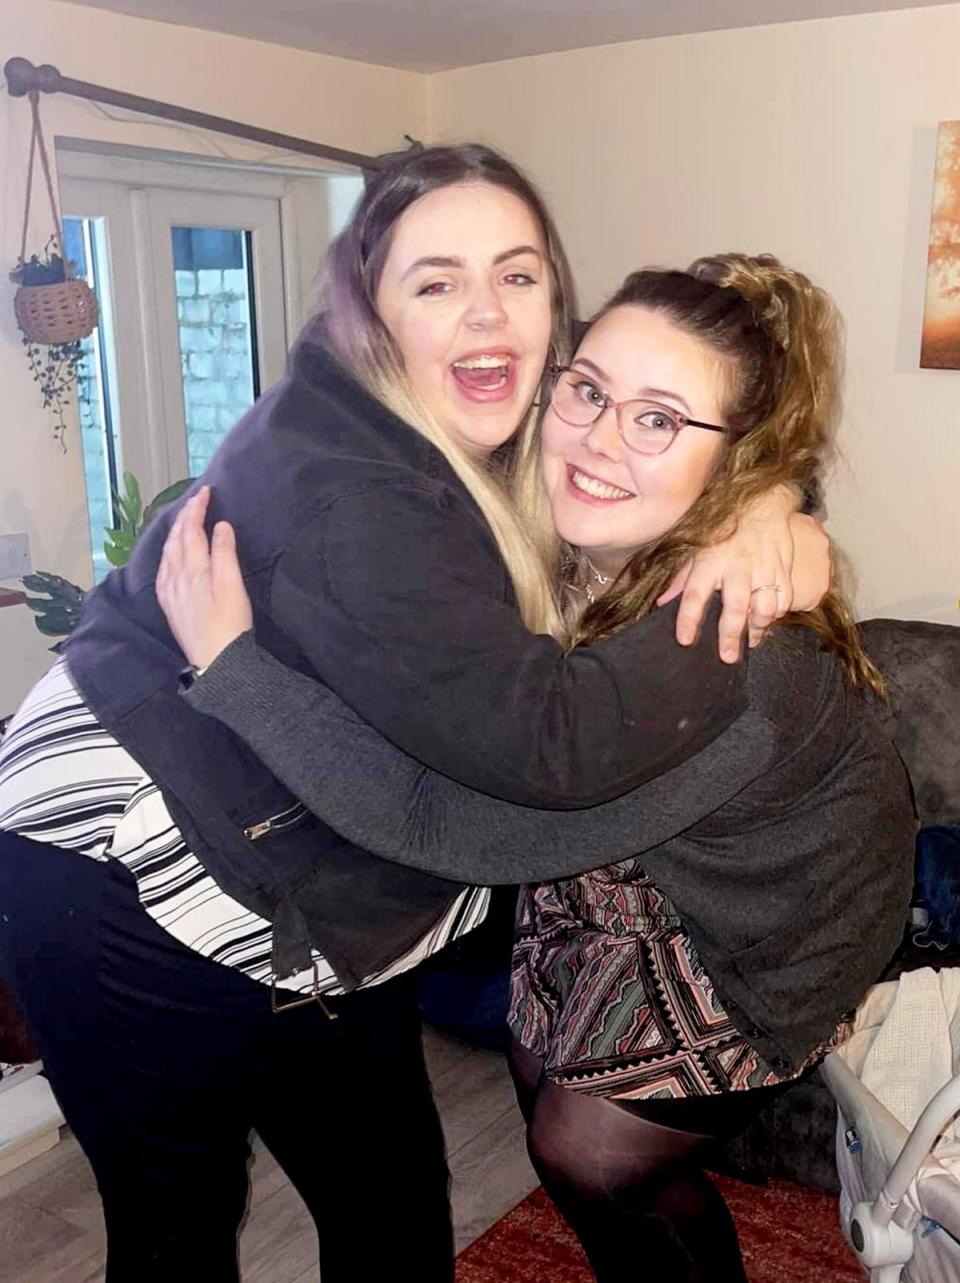 Chloe Quick who was put in a medically induced coma after having surgery for a gastric sleeve in Turkey - Pictured with friend Leah Mattson (Leah Mattson/Quick Family/SWNS)